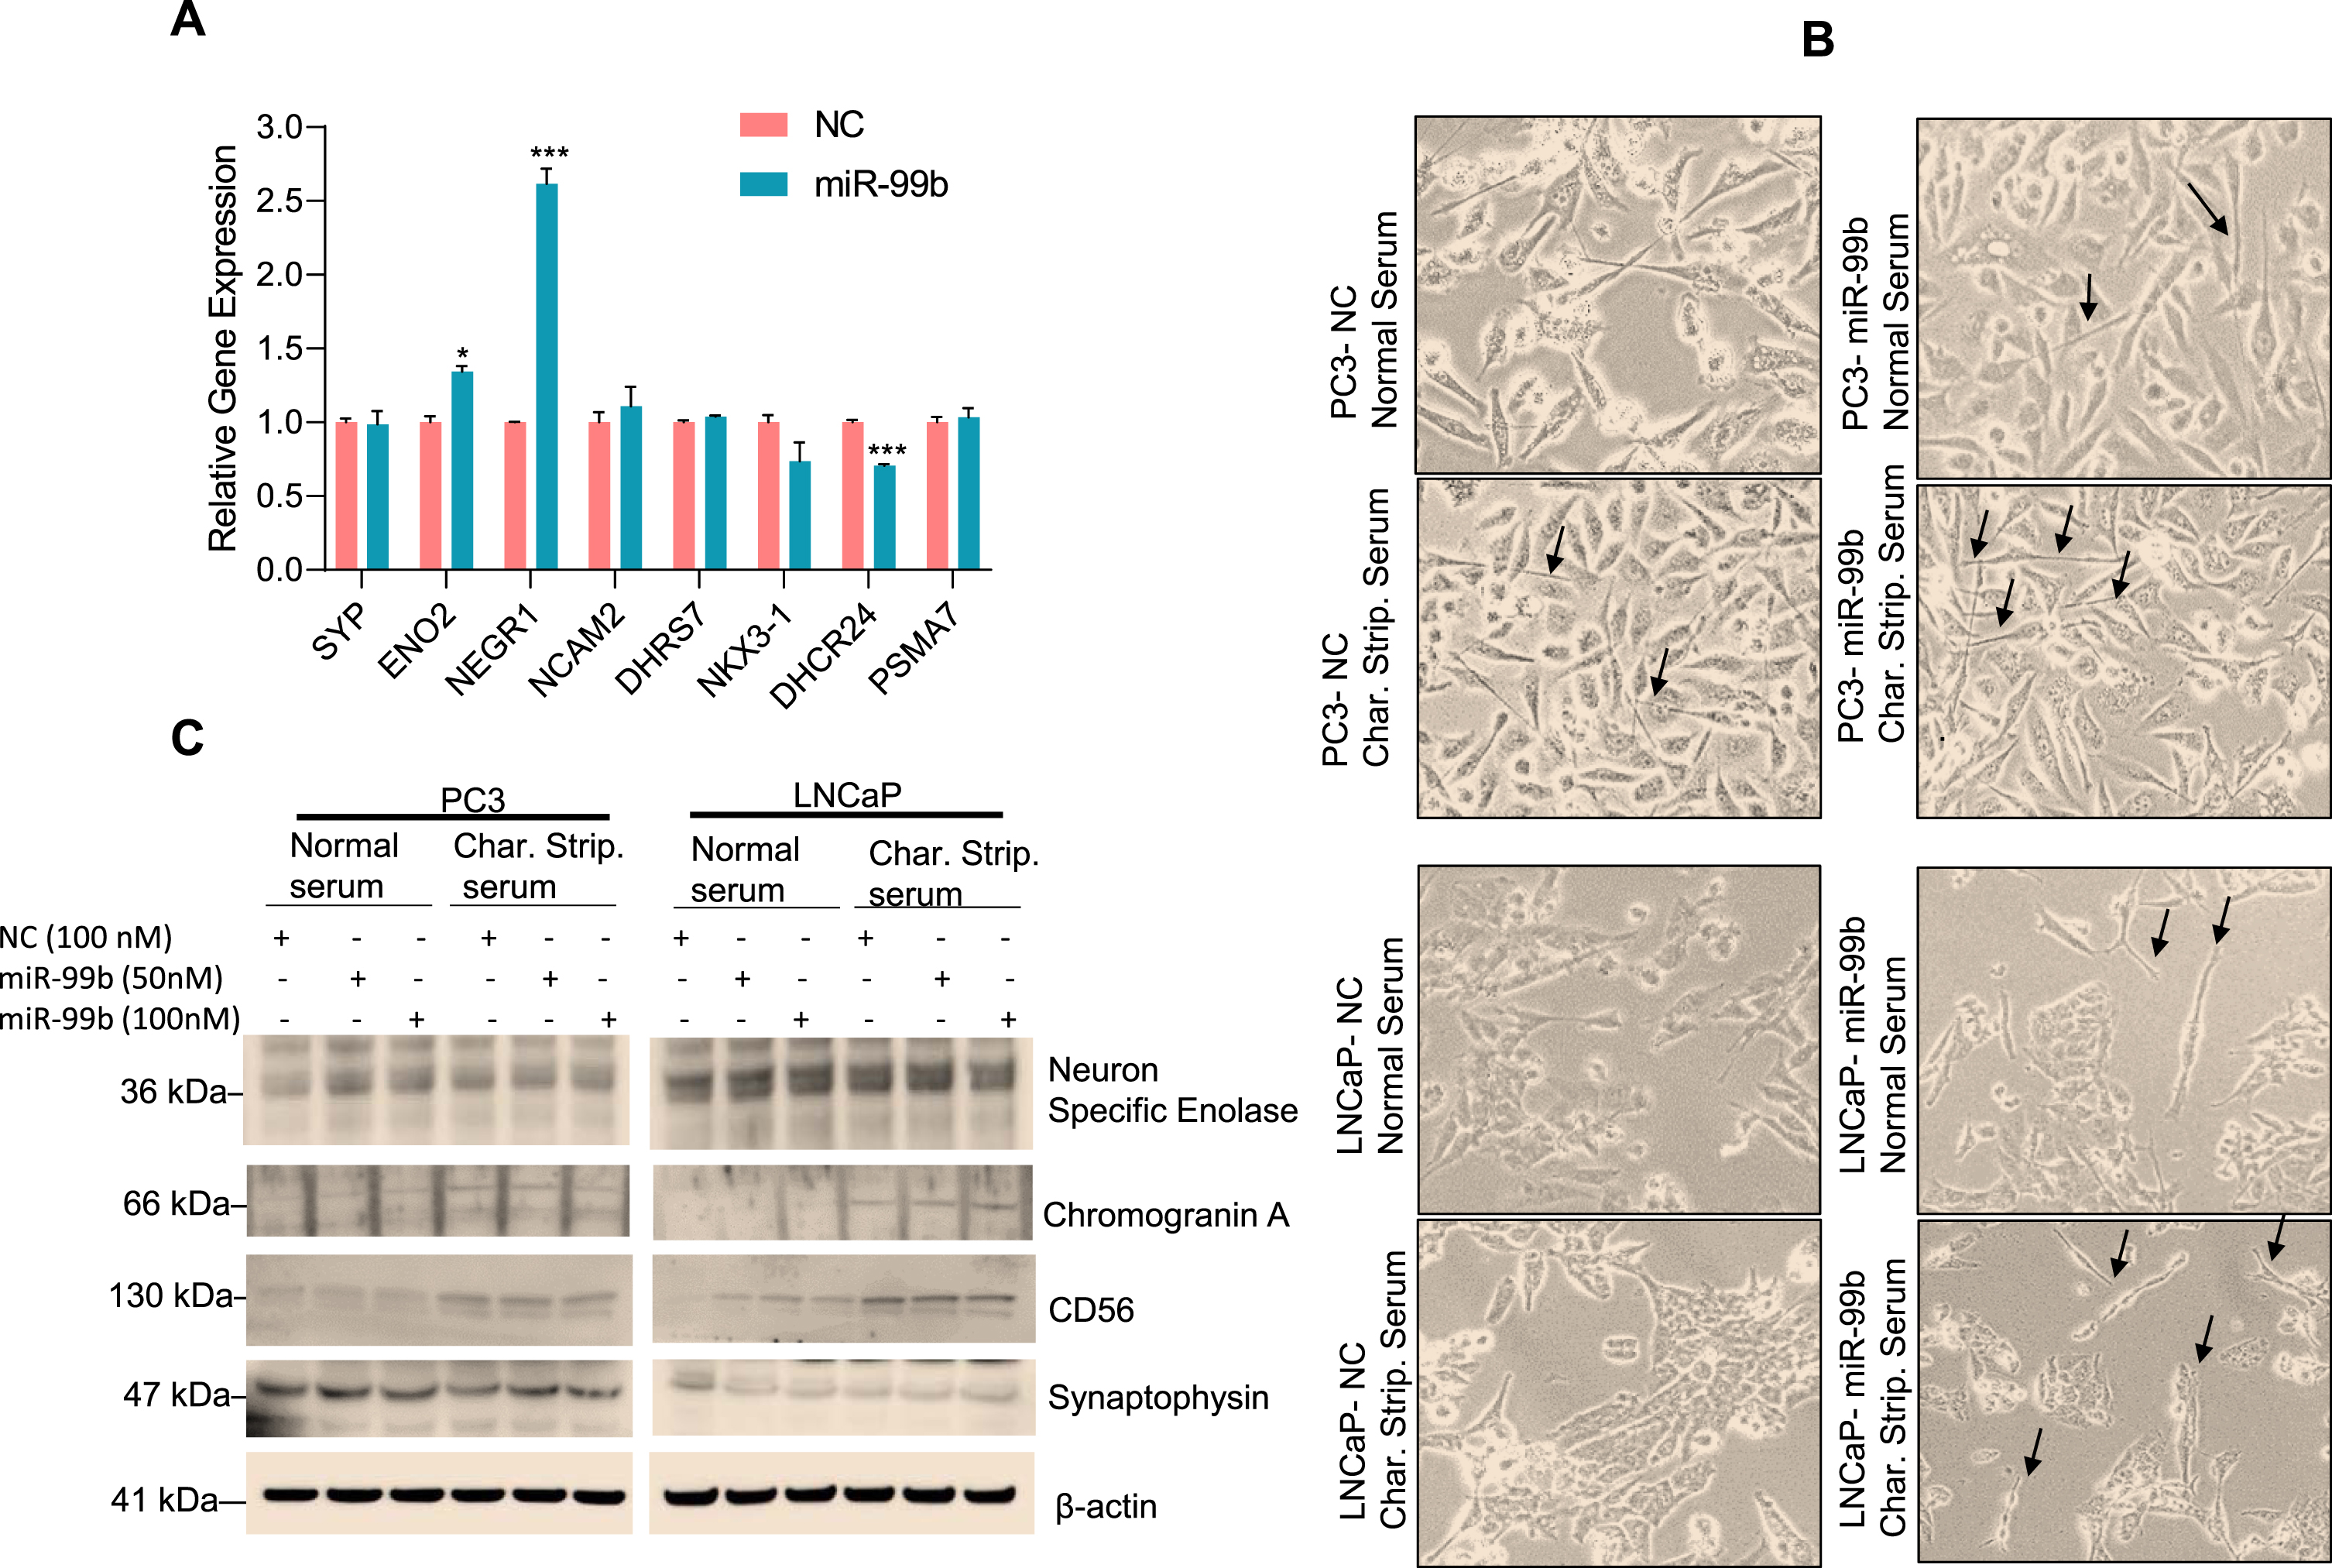 miR-99b induces NED marker expression in PC3 and LNCaP cells (A) PC3 cells were transfected with NC of miR-99b for 24 h in triplicate and the effect of overexpression of miR-99b on the regulation of NED markers expression in PC3 cells were analyzed by RNA-seq. *P < 0.05, ***P < 0.001 compared with NC transfected PC3 cells. (B) PCa PC3 and LNCaP cells were grown in normal serum or charcoal-stripped serum and transfected with NC or miR-99b mimic (100 nM) for 48 h. Cells were observed under a microscope and photographed. (C) Similarly, PC3 and LNCaP cells were grown in normal serum or charcoal-stripped serum and transfected with NC or miR-99b mimic for 48 h and cell lysates were immunoblotted with indicated antibodies.